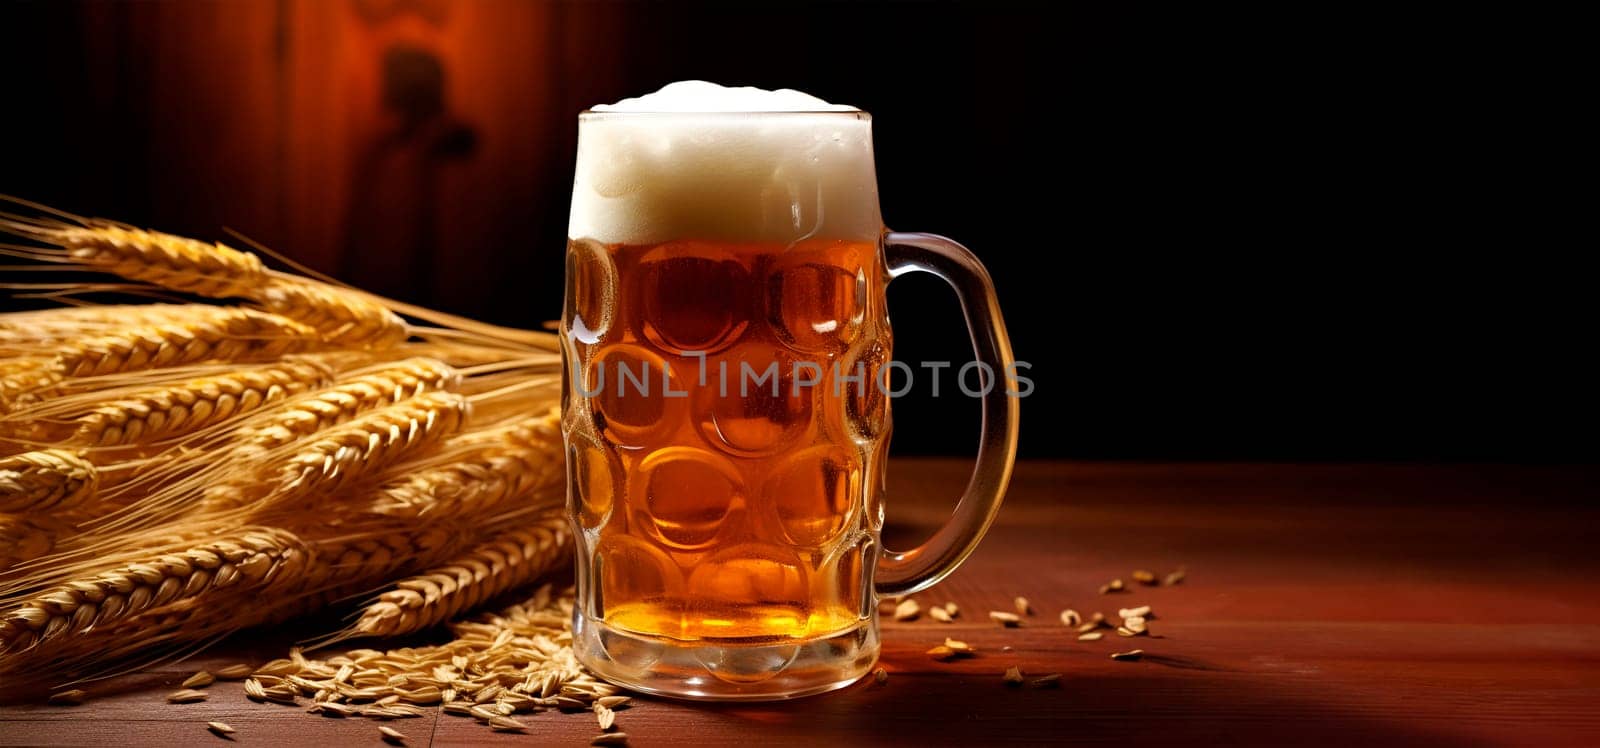 Beer in a jug with wheat and malt on a wooden table. Oktouberfest beer making festival. copy paste your design